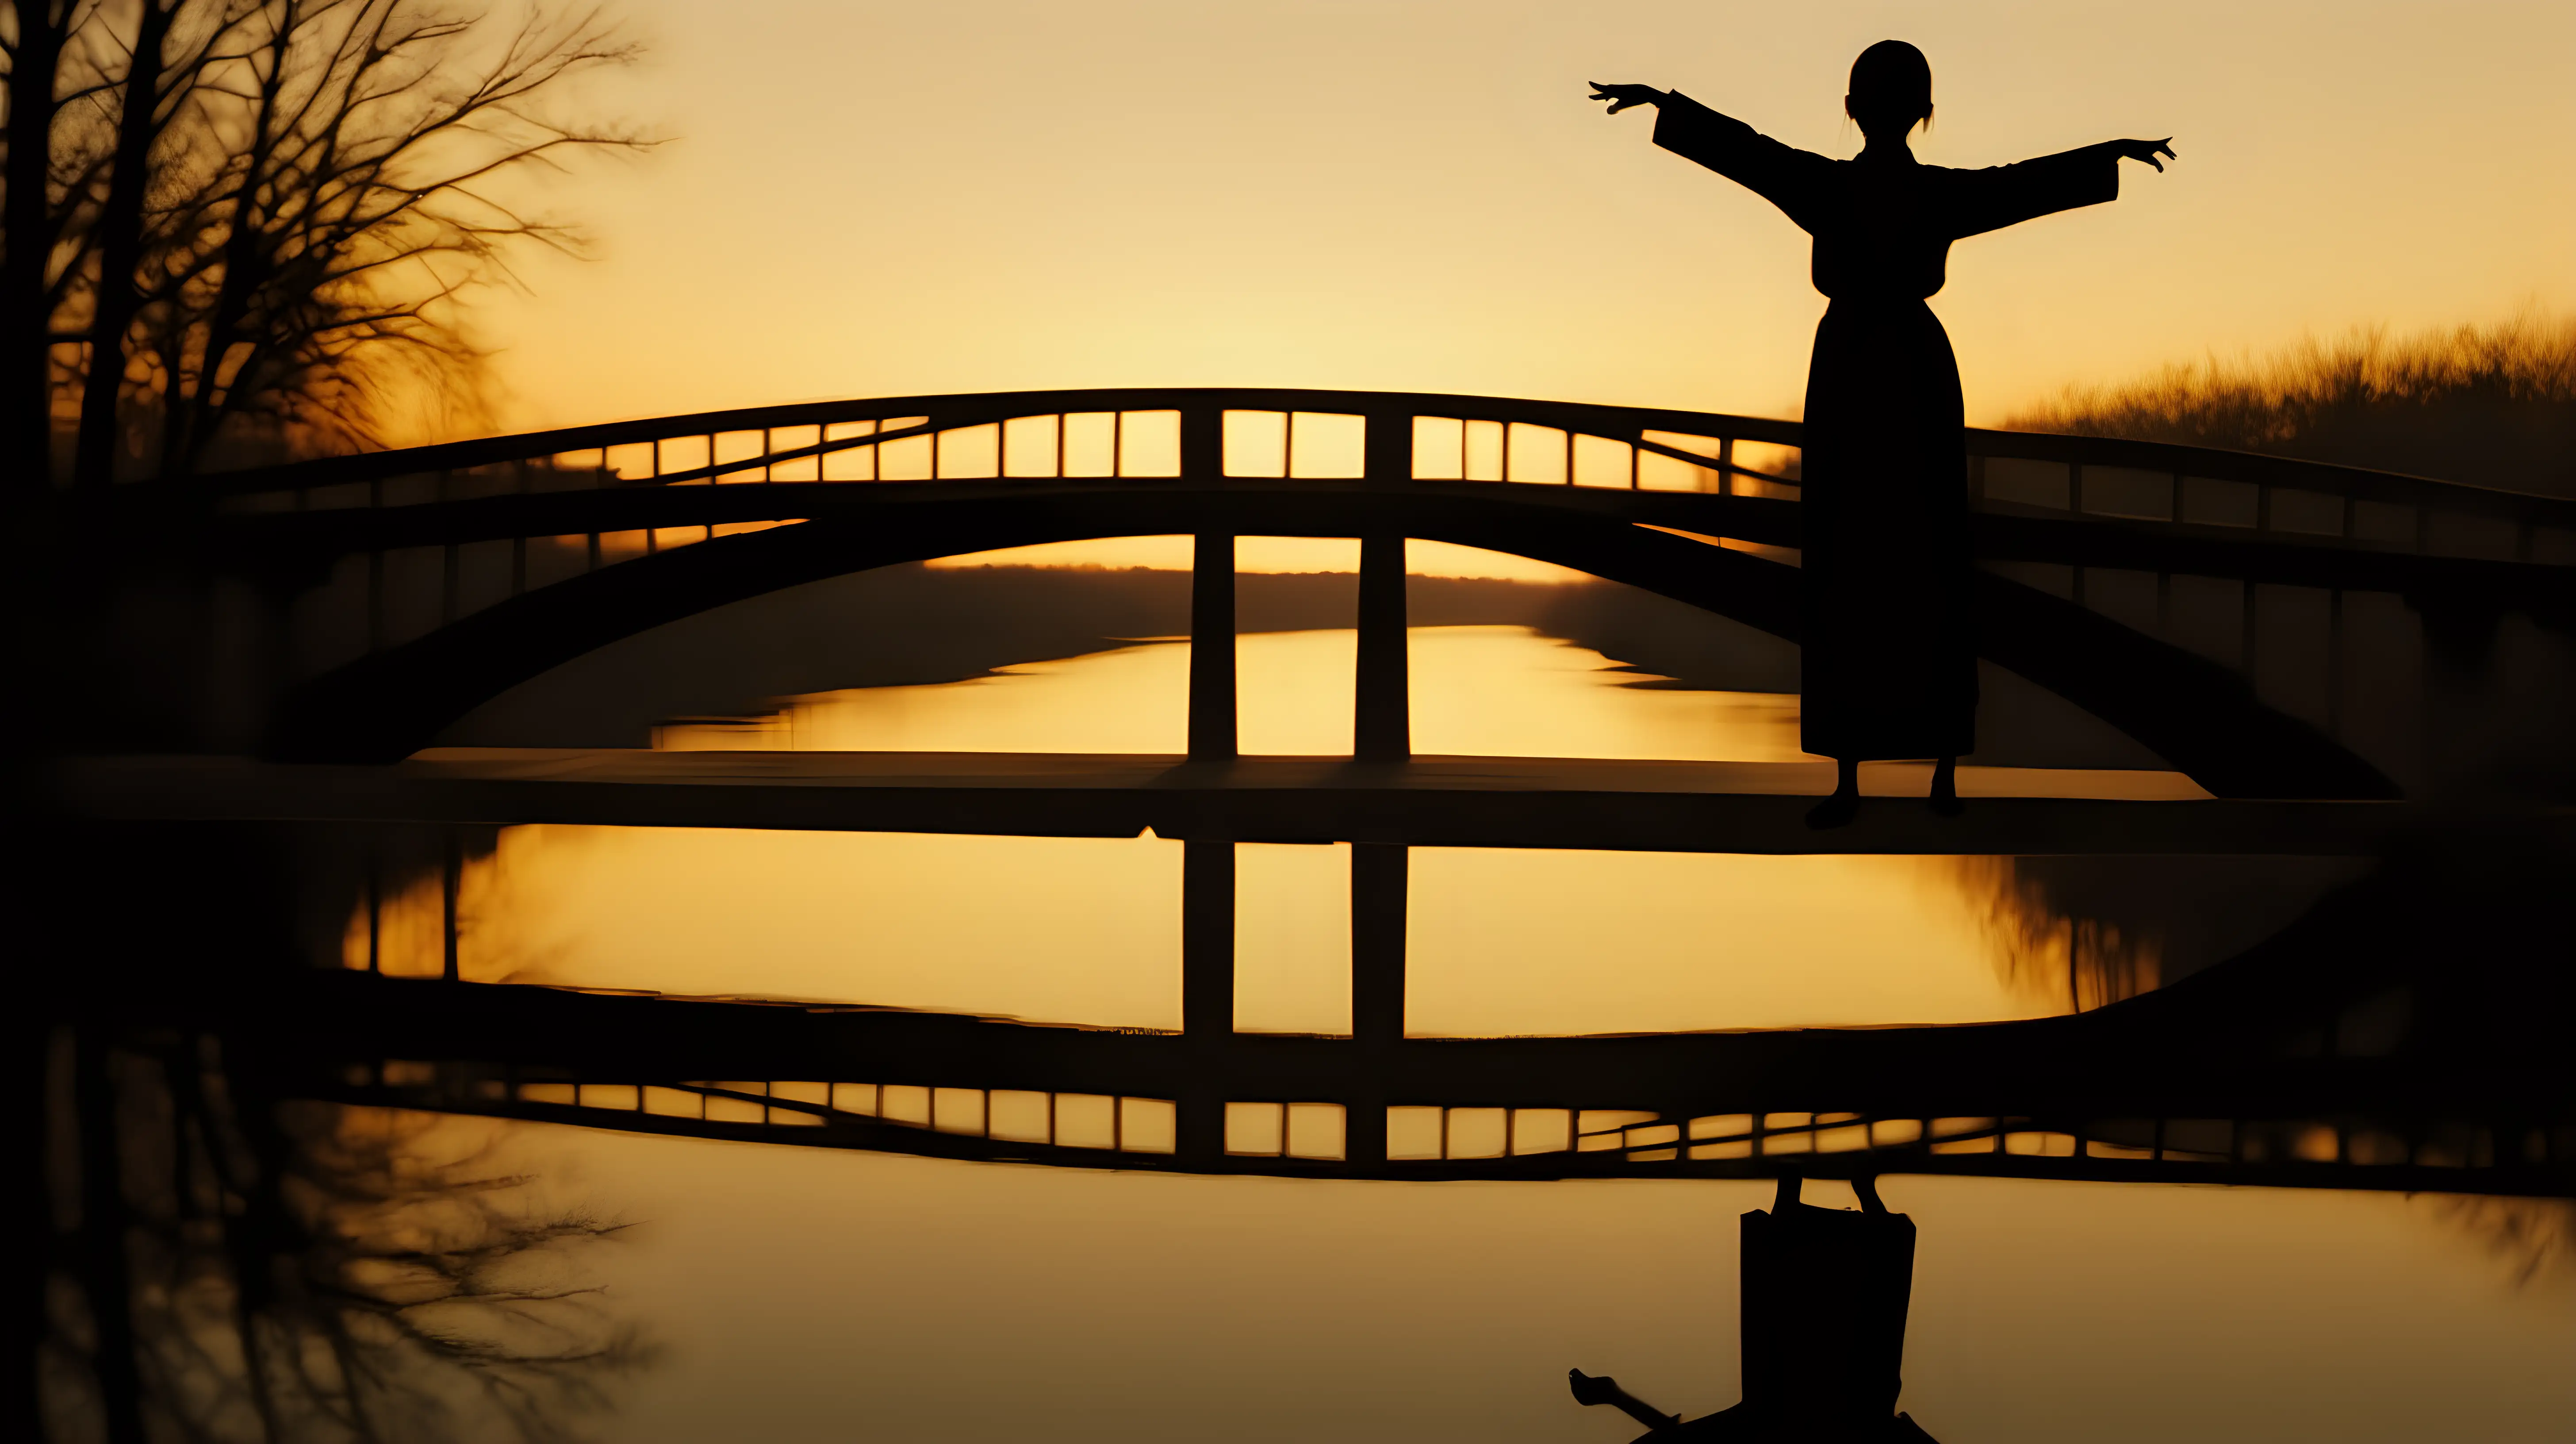 /imagine prompt: A silhouette of someone on a bridge, arms open, as the last light of day casts a golden sheen over a calm river. The water reflects the colors of the sunset, with the bridge providing a gentle arch over the tranquil scene. The figure's pose suggests a narrative of journey and reflection. Created Using: golden hour, river reflection, bridge structure, tranquil water, narrative pose, journey and reflection theme, crisp silhouette against sunset, hd quality --ar 16:9 --v 6.0